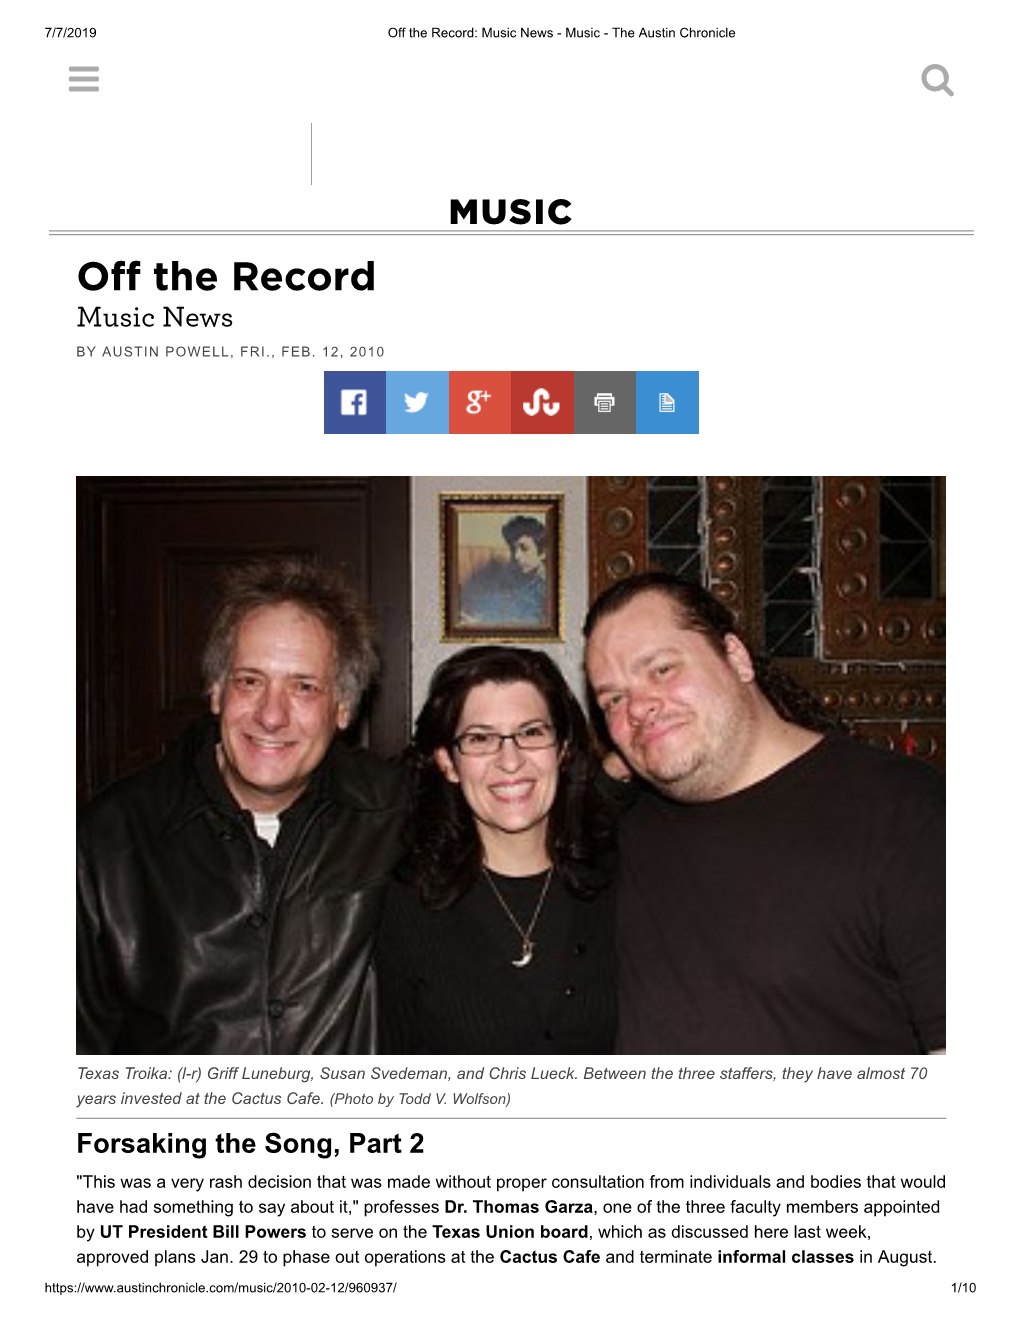 Off the Record: Music News - Music - the Austin Chronicle  